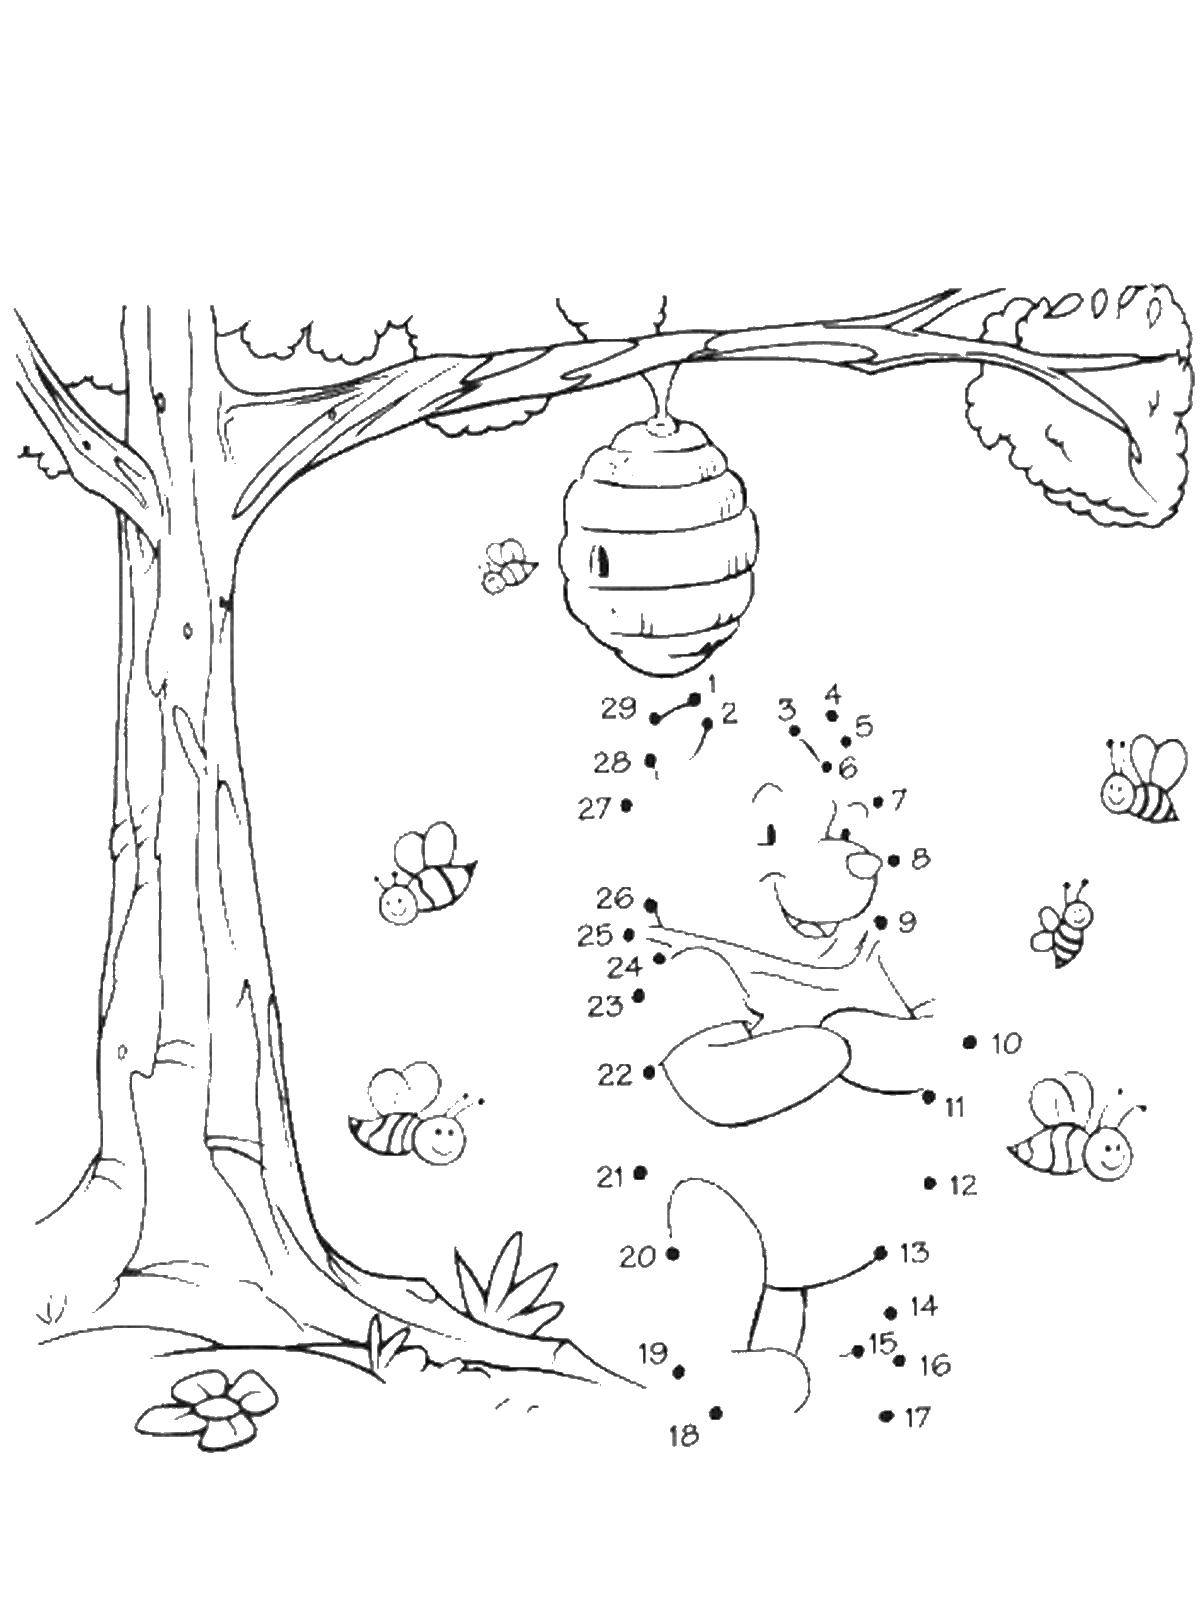 Coloring Winnie the Pooh. Category coloring by numbers. Tags:  Winnie the Pooh, bees, rooms.